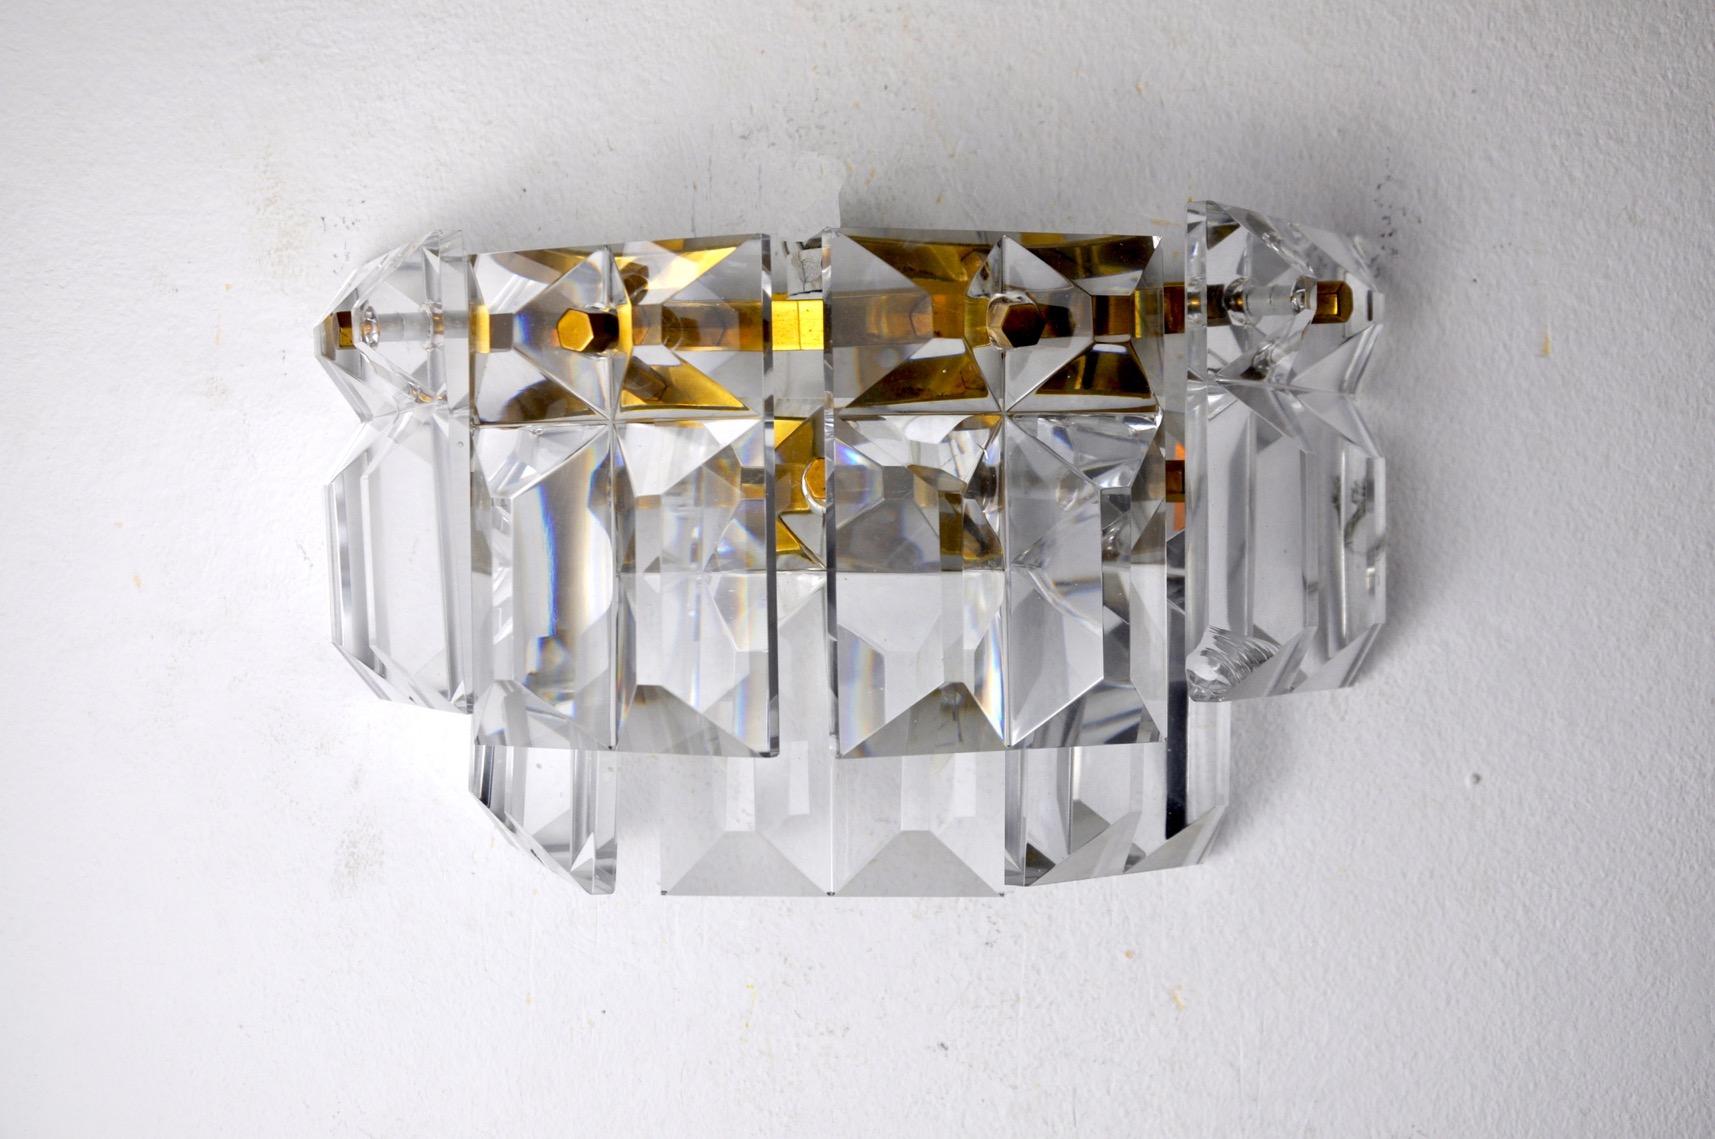 Superb Kinkeldey applique designated and produced in Germany in the 1970s. Crystals cut and distributed on a golden metal structure. Very nice design object that will illuminate your interior beautifully. Verified electricity, time marks relating to